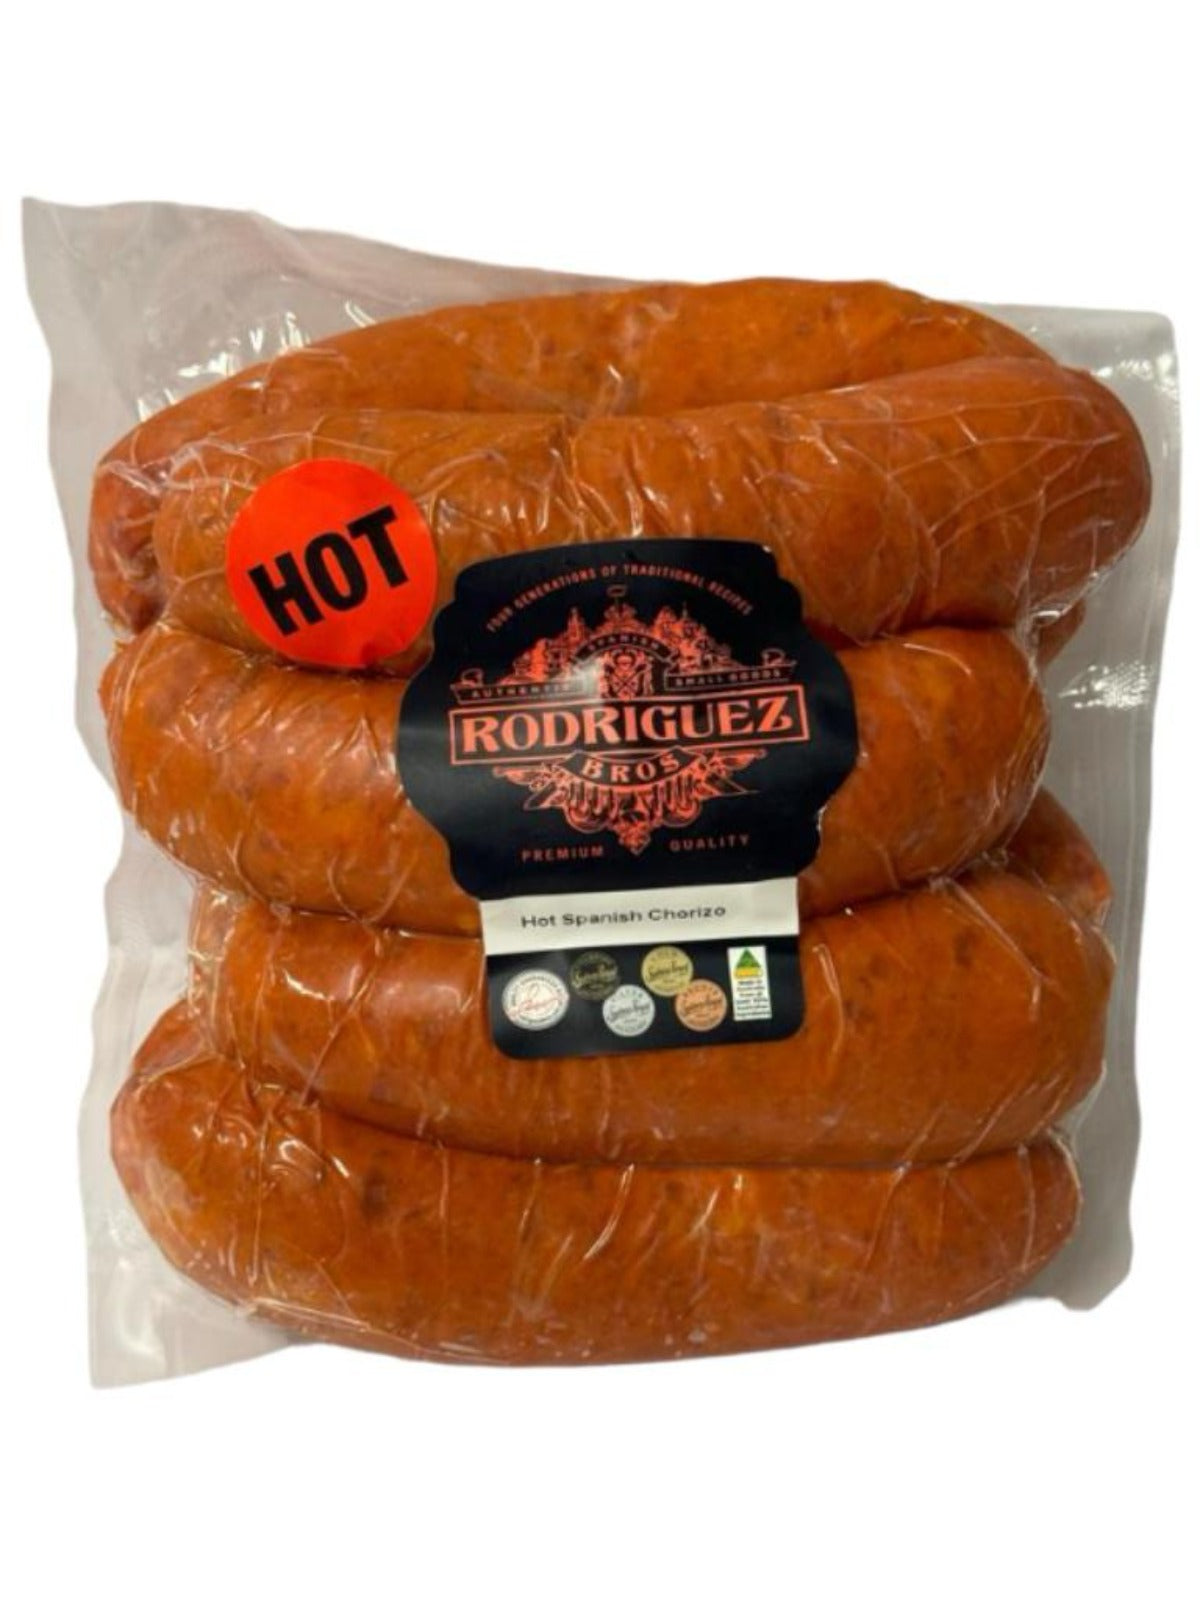 HOT Fresh Spanish Chorizo Random weight approx 1kg packet 8 pieces regular price $15.50 AUD. You are guaranteed to receive at least 950g of product, equivalent price of $16.32 per kg.